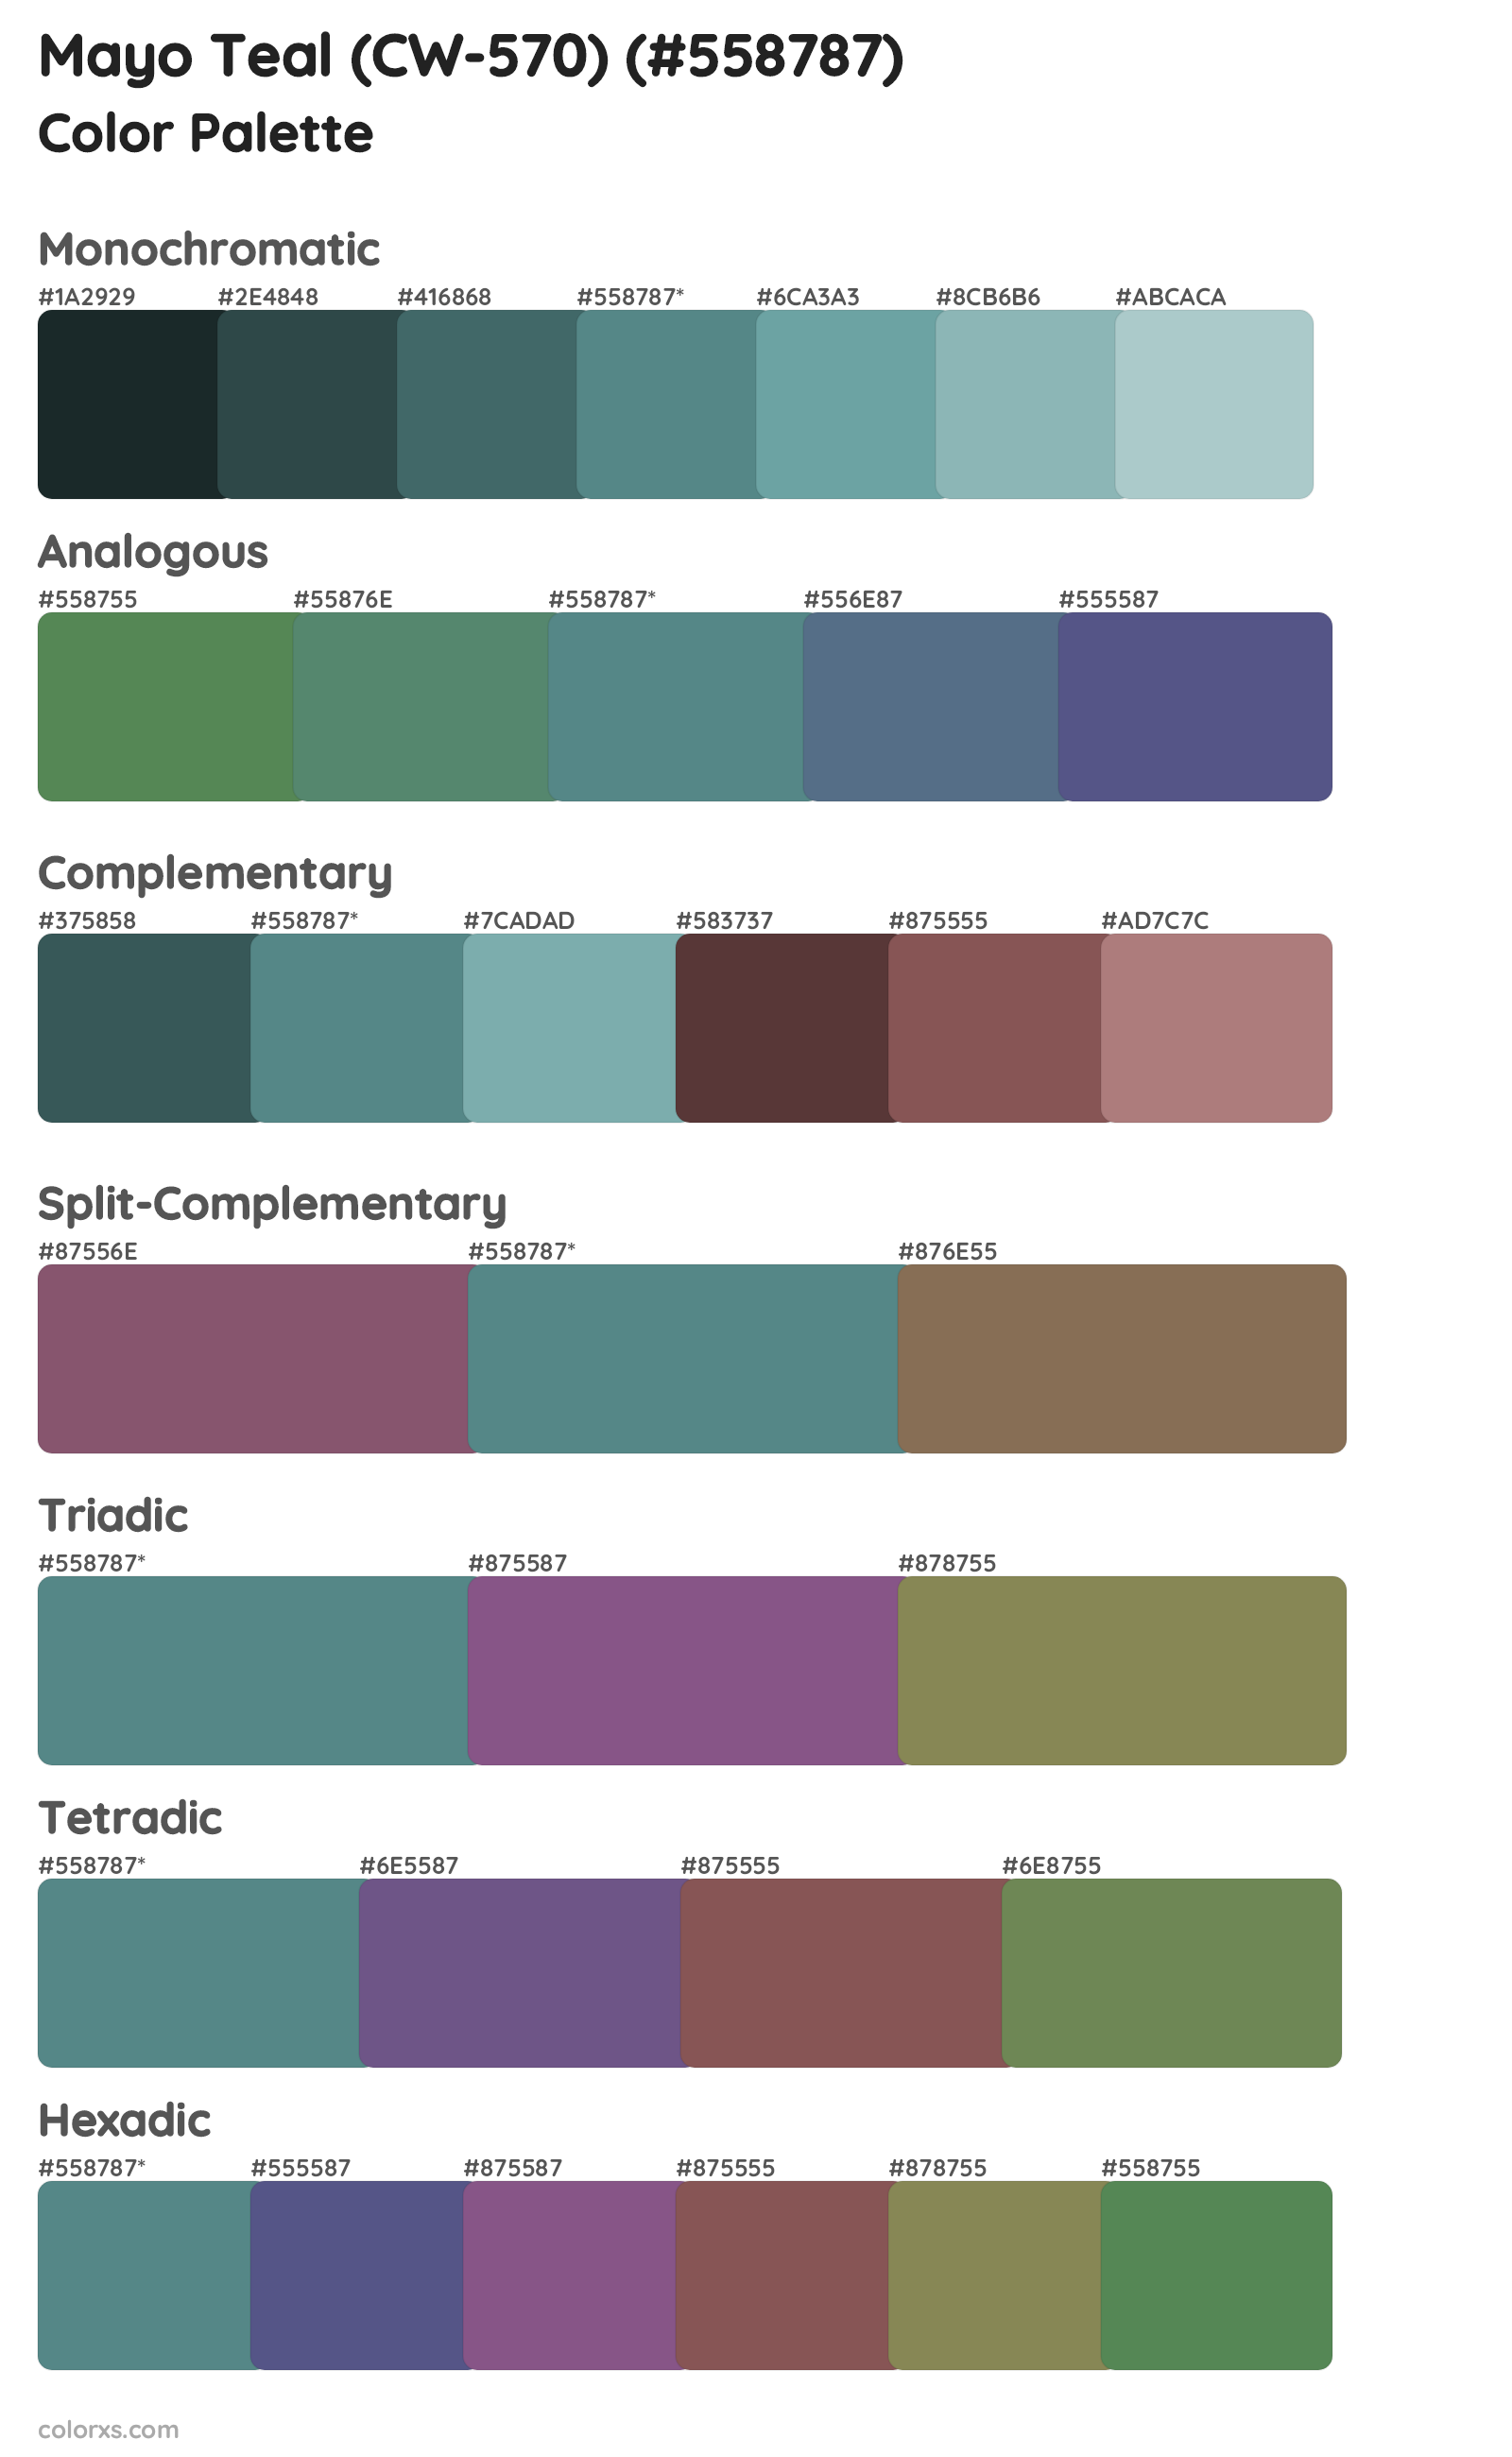 Mayo Teal (CW-570) Color Scheme Palettes